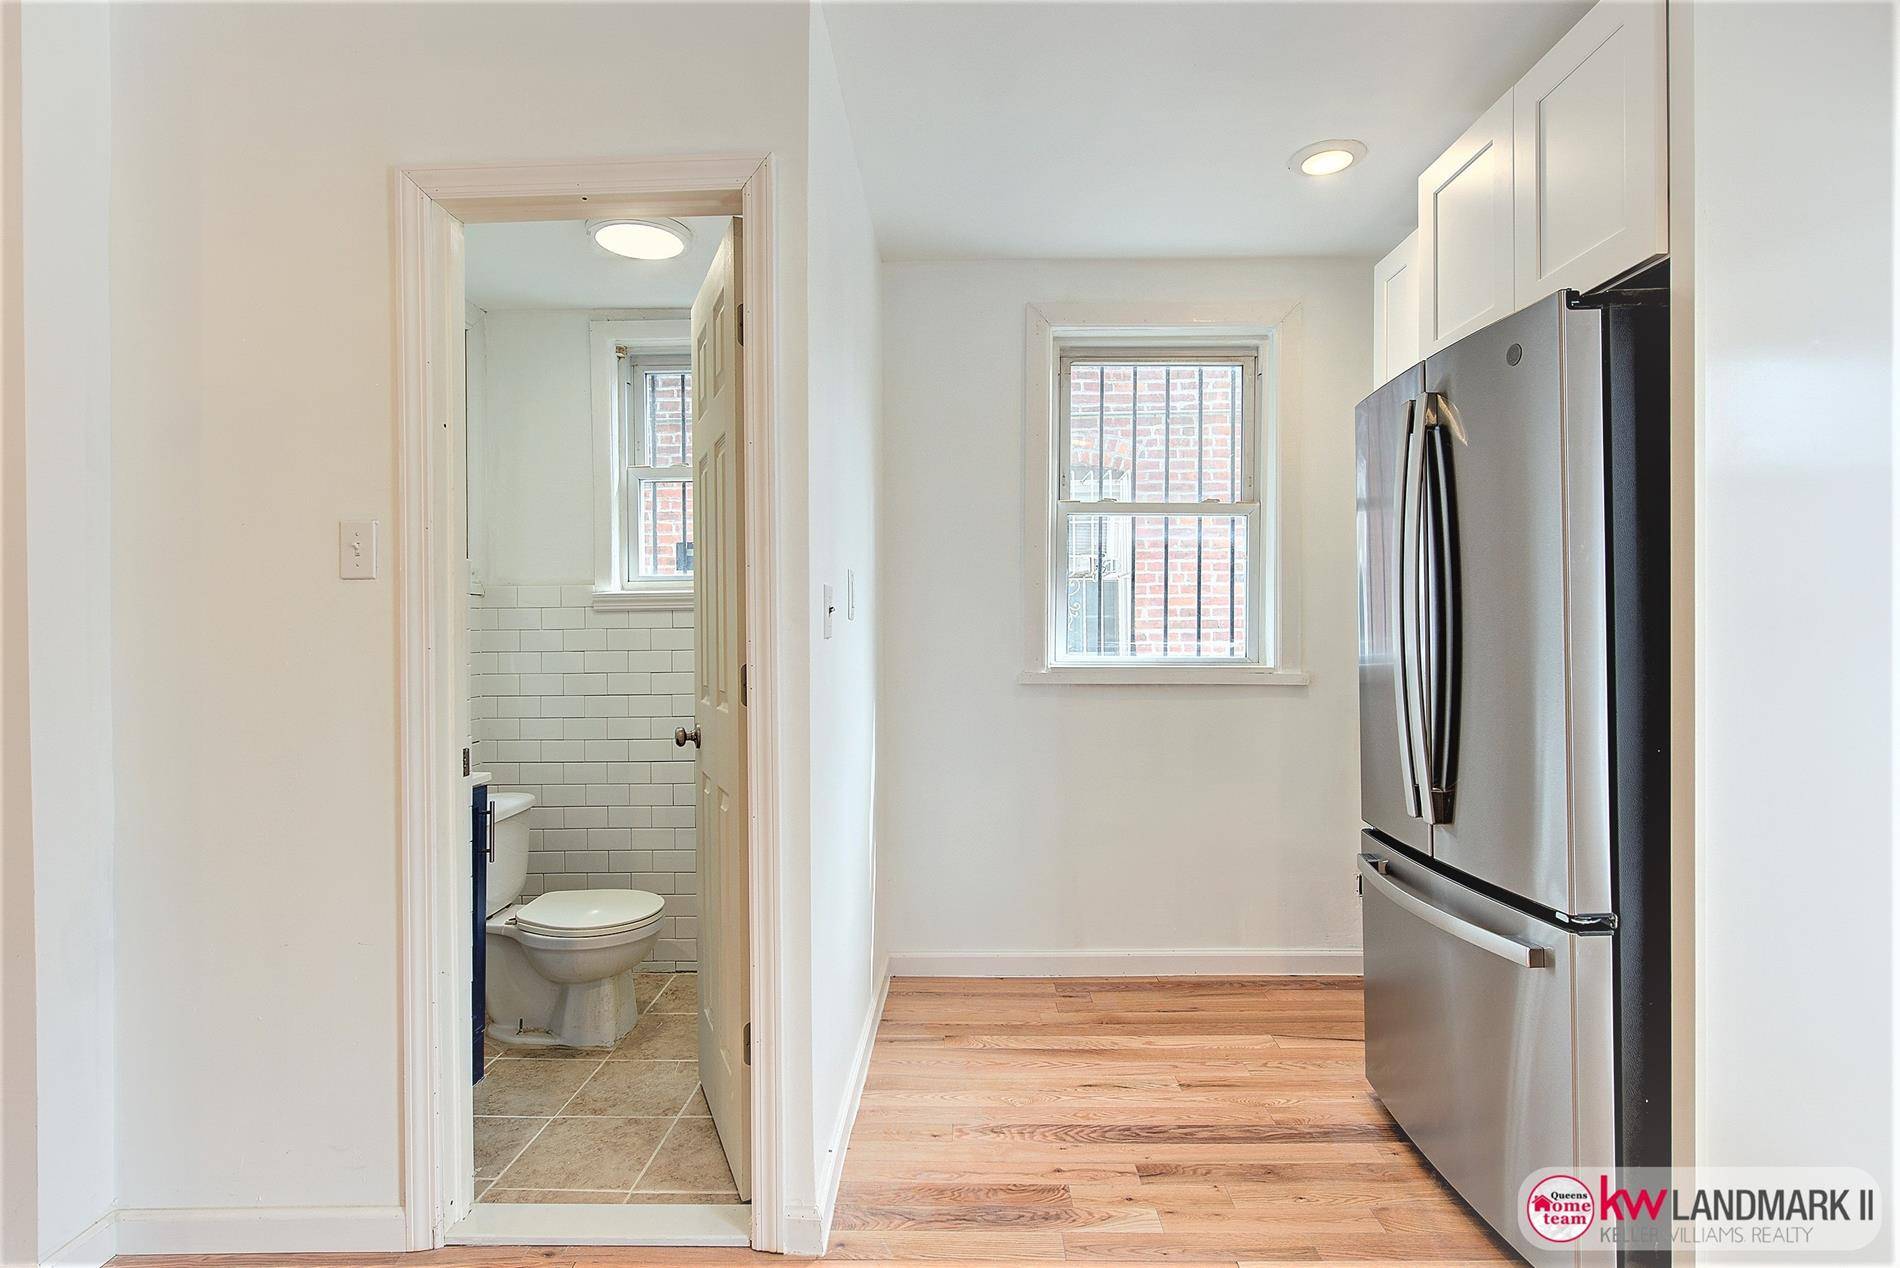 Impressive, fully renovated semi detached brick construction home in desirable area of South Ozone Park, Queens.